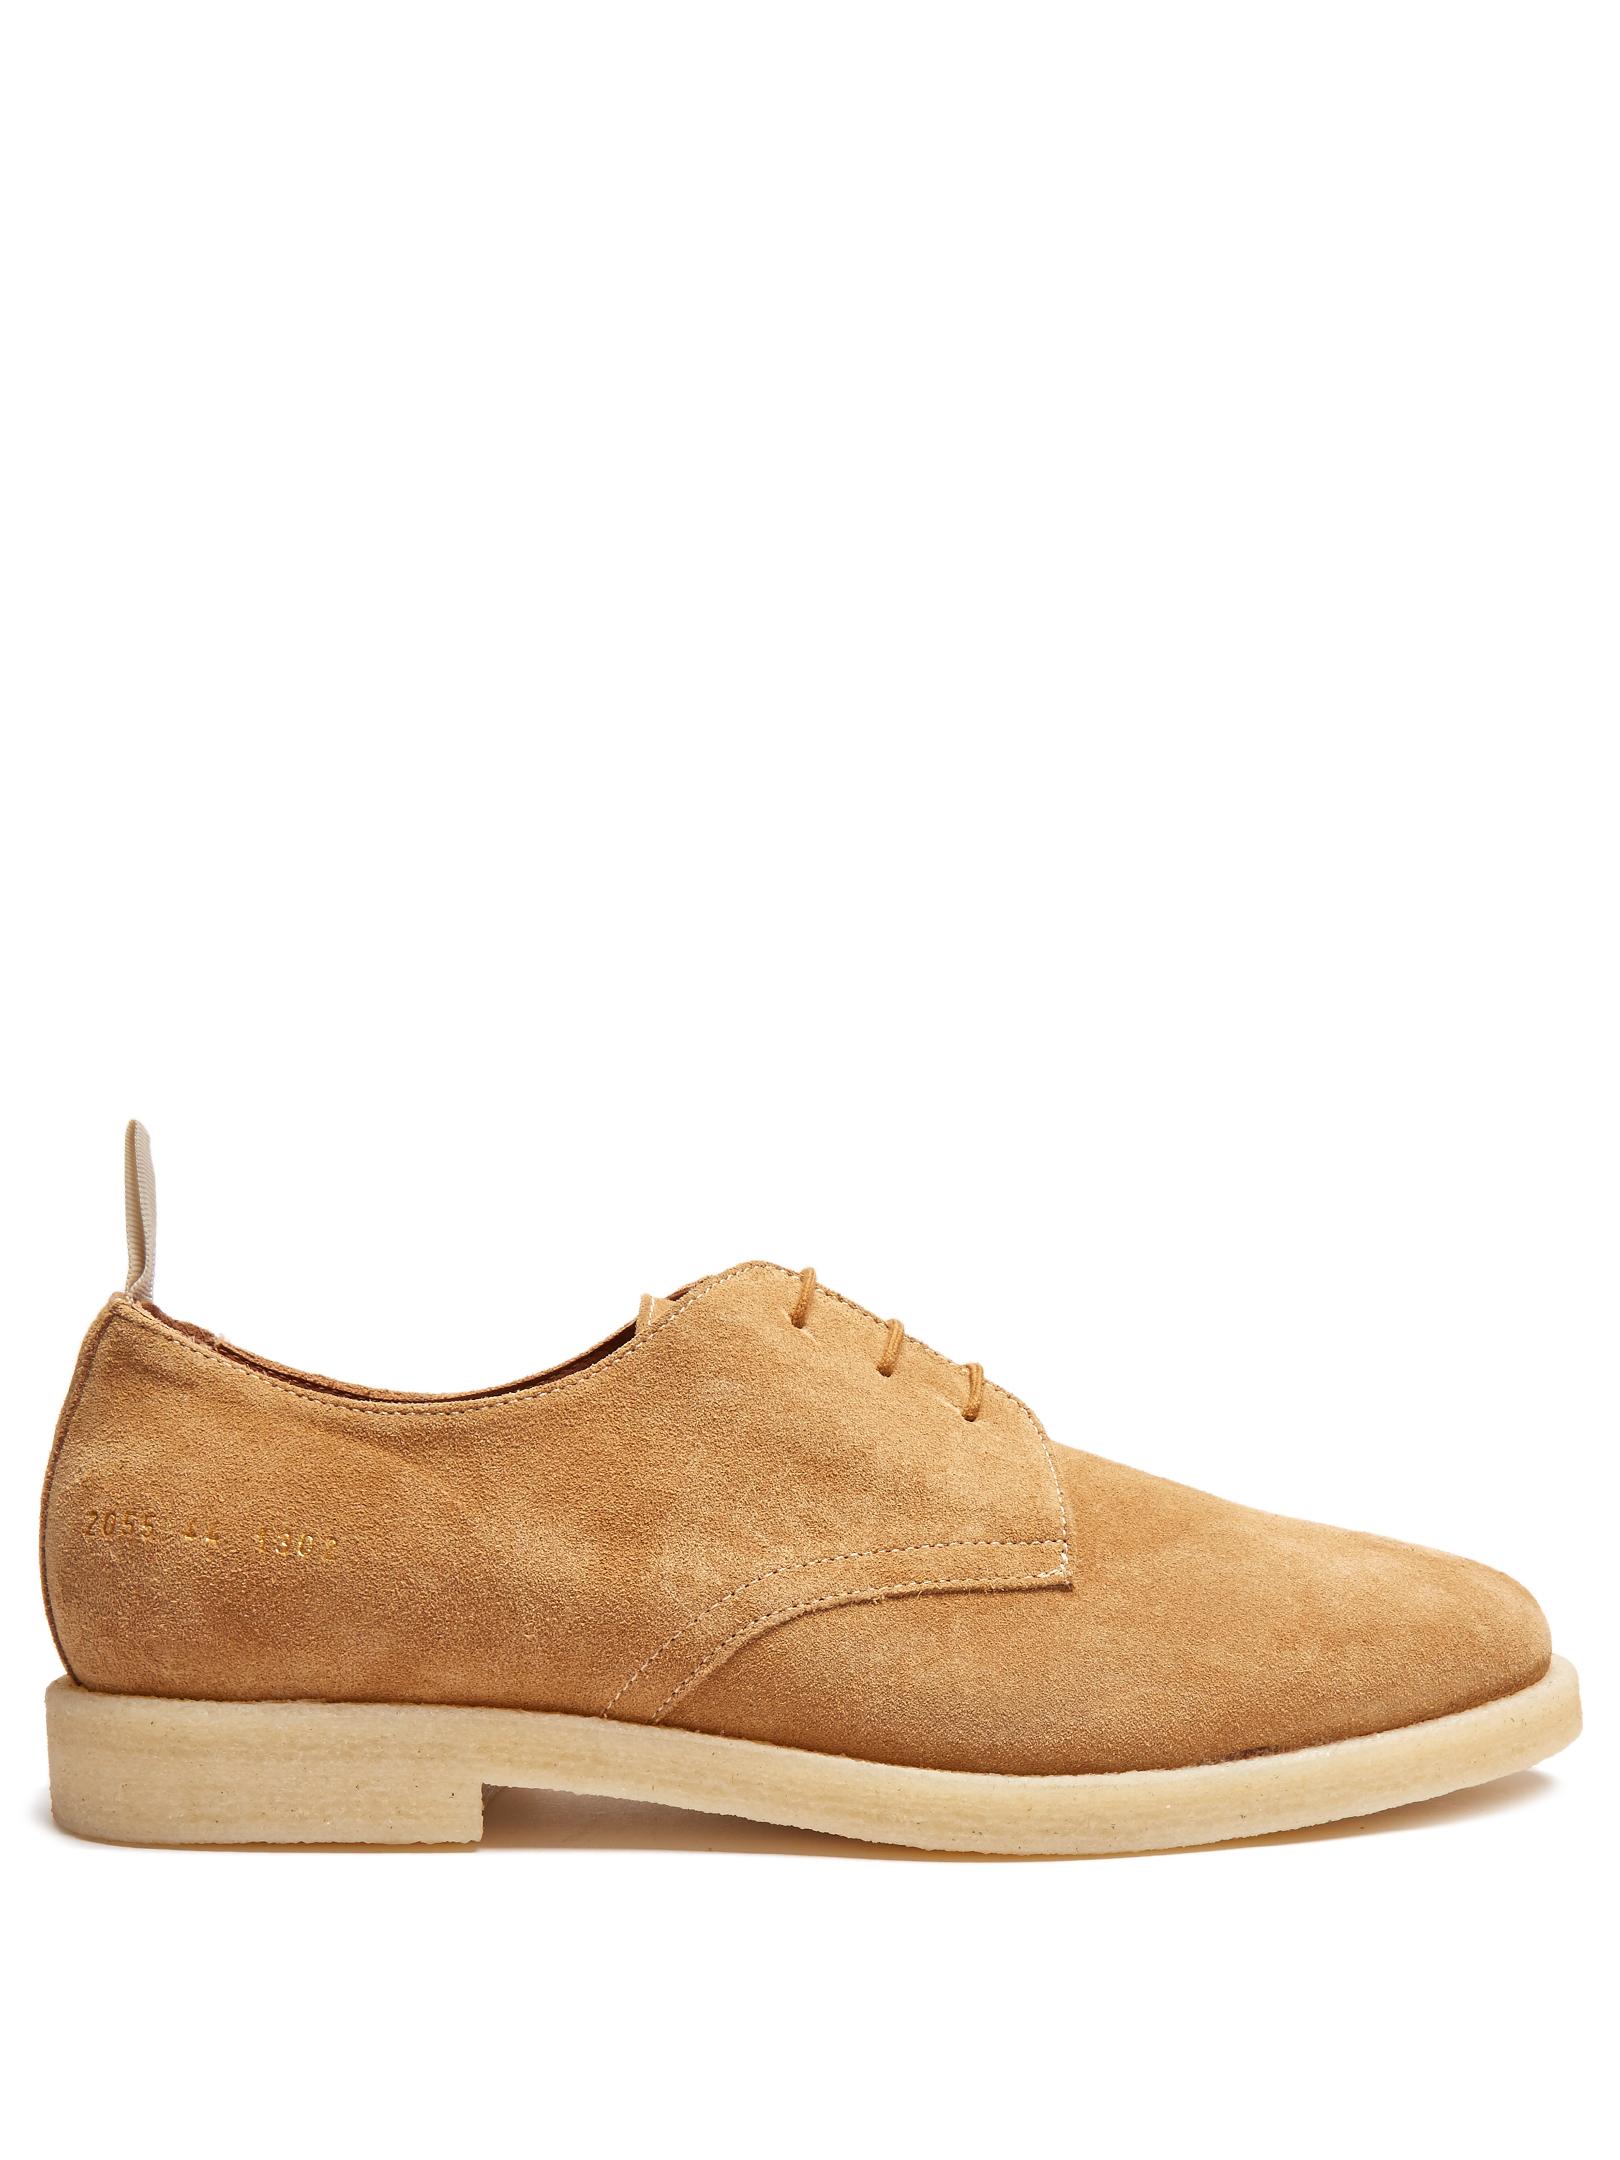 Common Projects Cadet Suede Derby Shoes for Men | Lyst